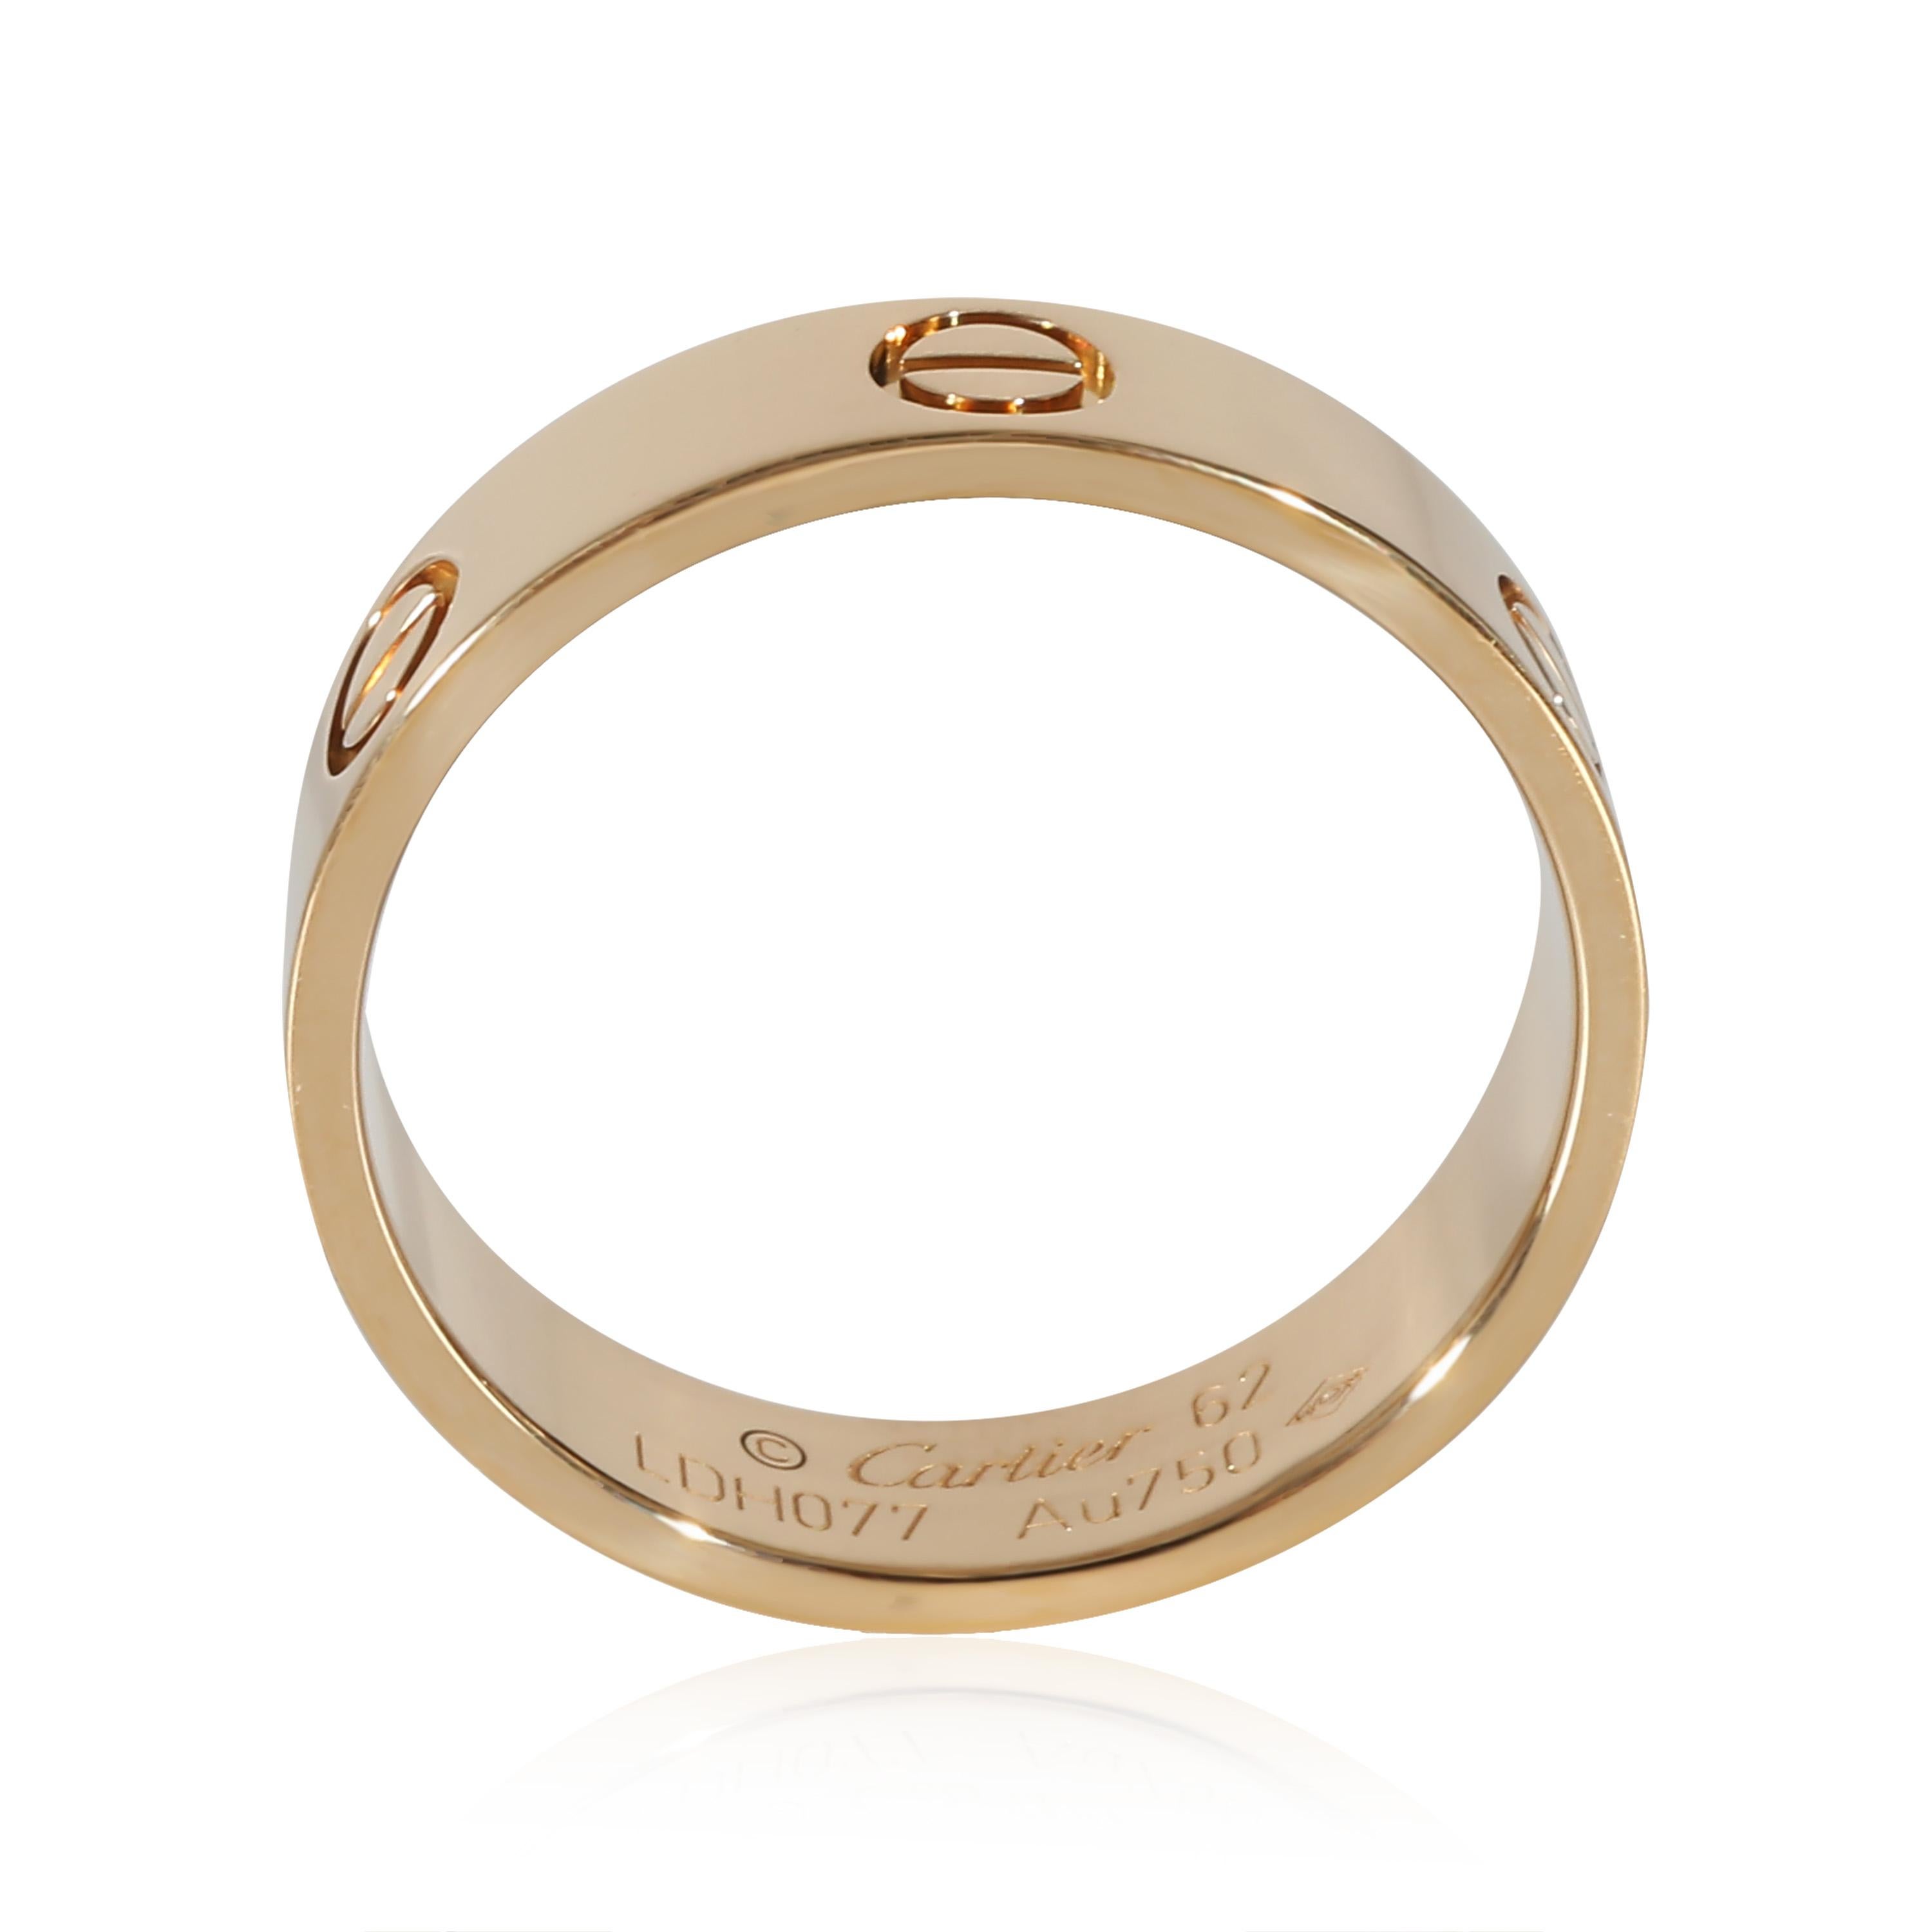 Cartier Love Ring in 18k Yellow Gold

PRIMARY DETAILS
SKU: 134872
Listing Title: Cartier Love Ring in 18k Yellow Gold
Condition Description: Cartier's Love collection is the epitome of iconic, from the recognizable designs to the history behind the